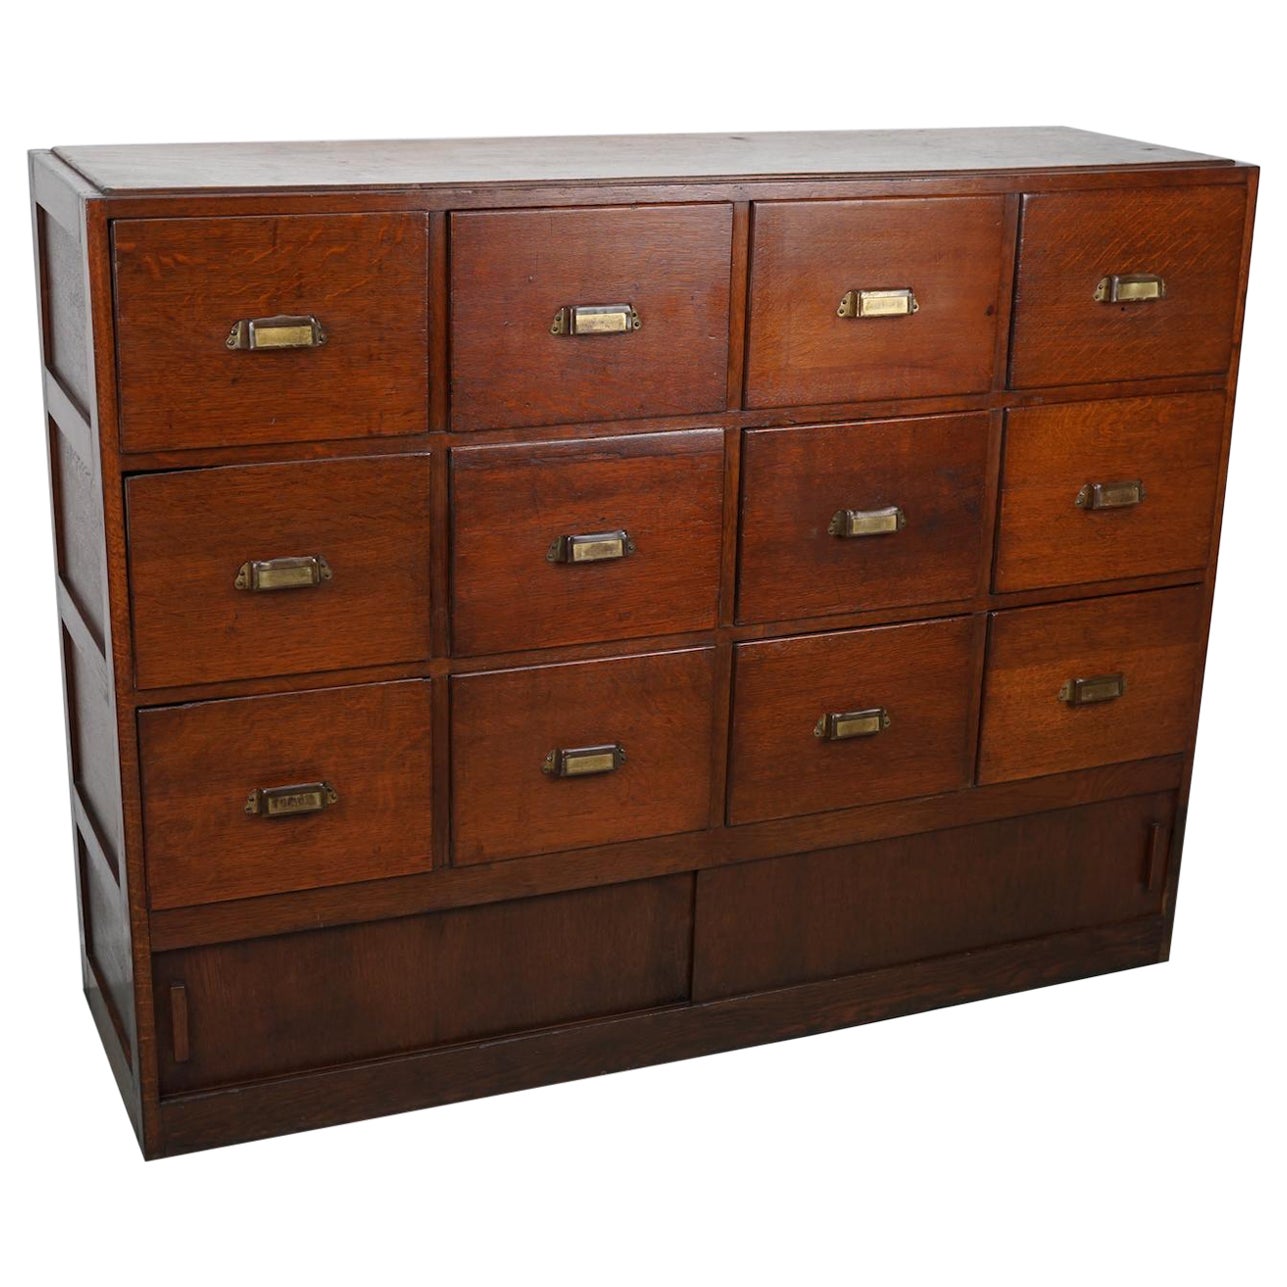 Antique Dutch Oak Apothecary Cabinet or Filing Cabinet, 1930s For Sale